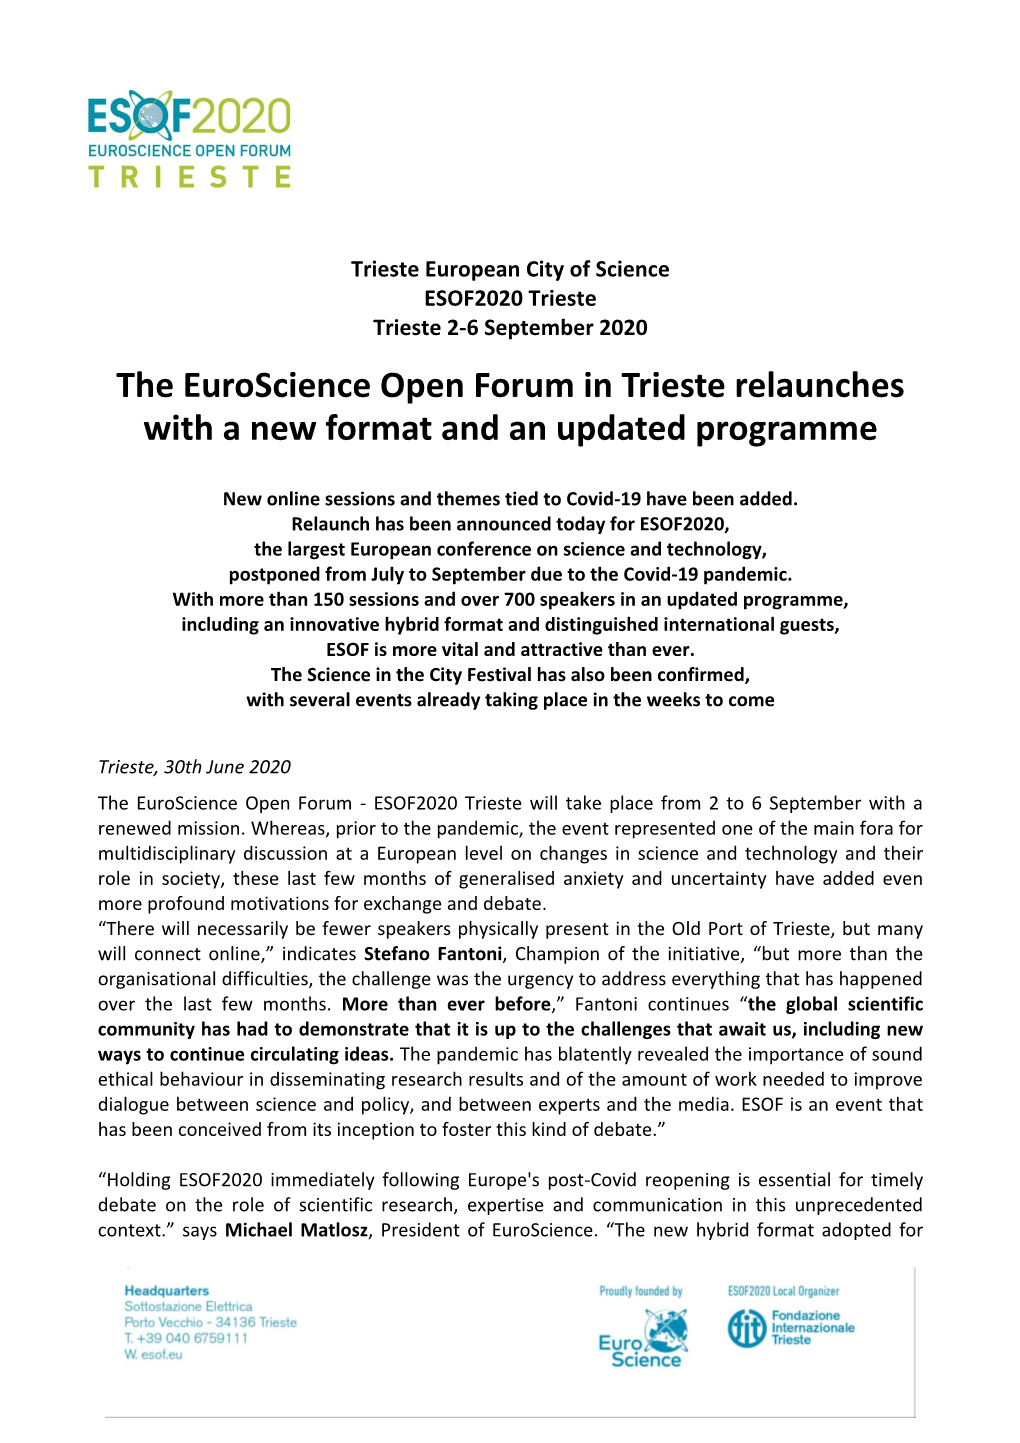 The Euroscience Open Forum in Trieste Relaunches with a New Format and an Updated Programme